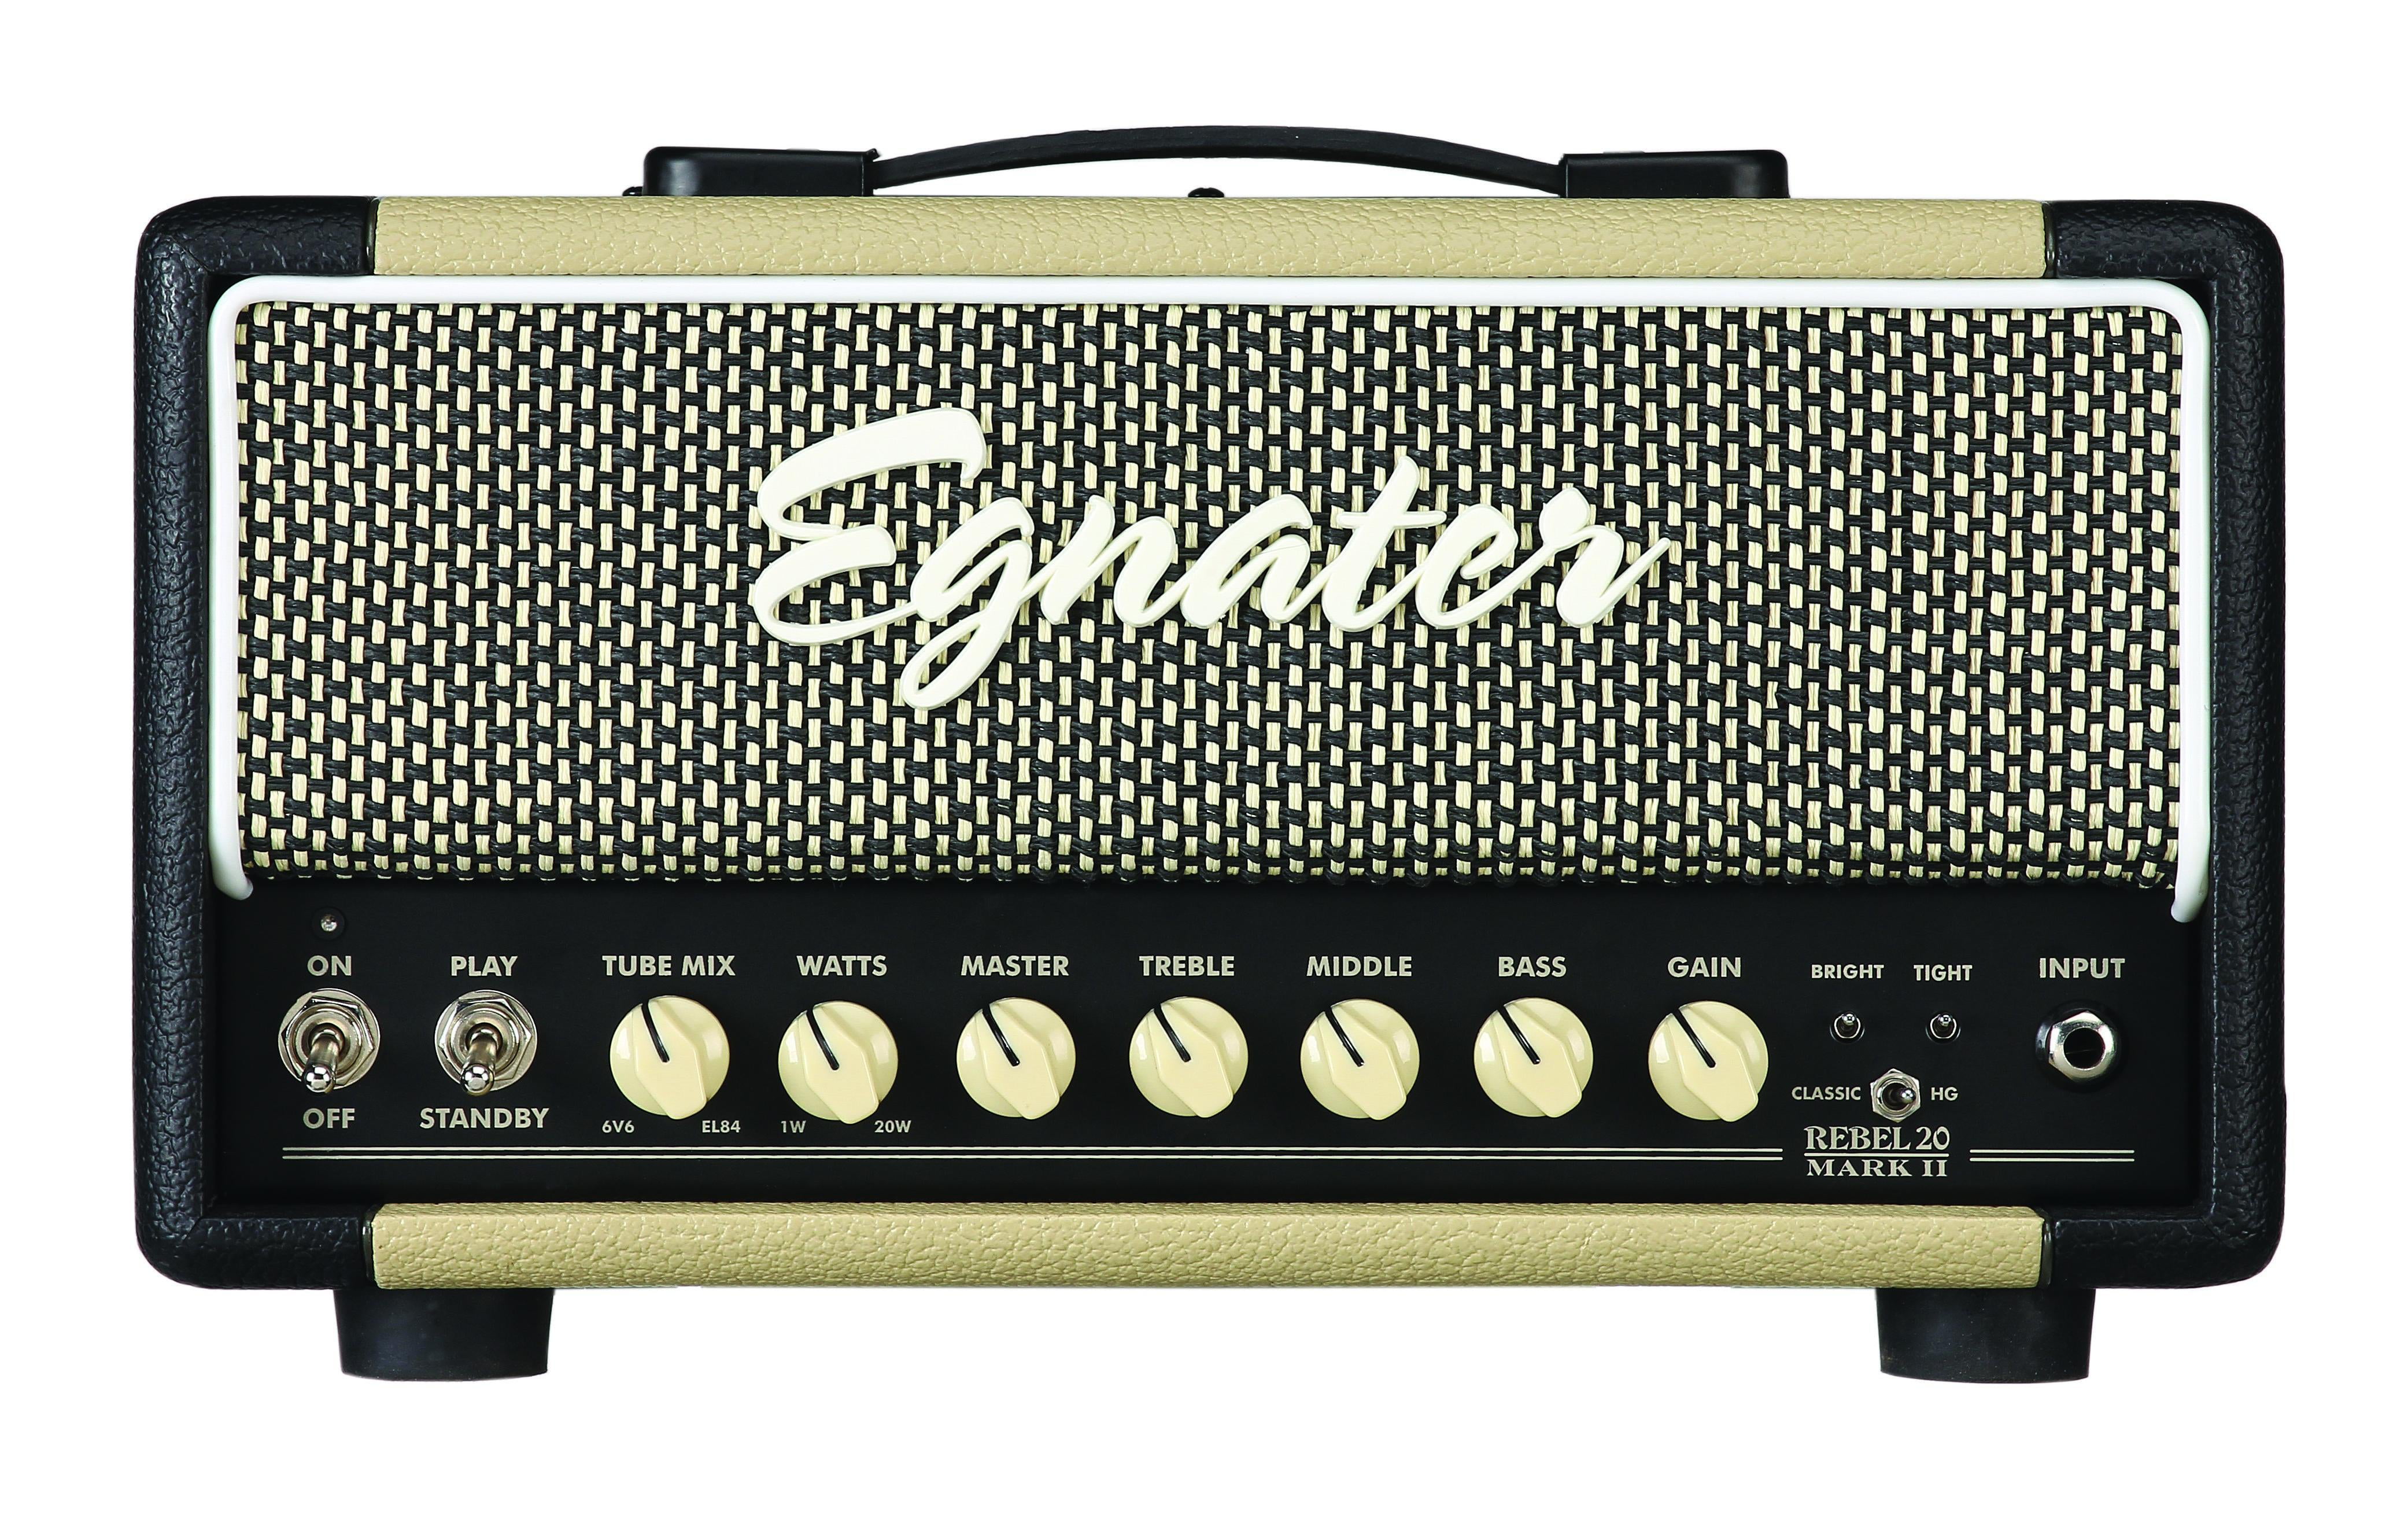 Headphone Output and AUX Input Tiger EGT20-BK 10 Watt 2 Channel Practice Electric Guitar Combo Amplifier with Drive EQ